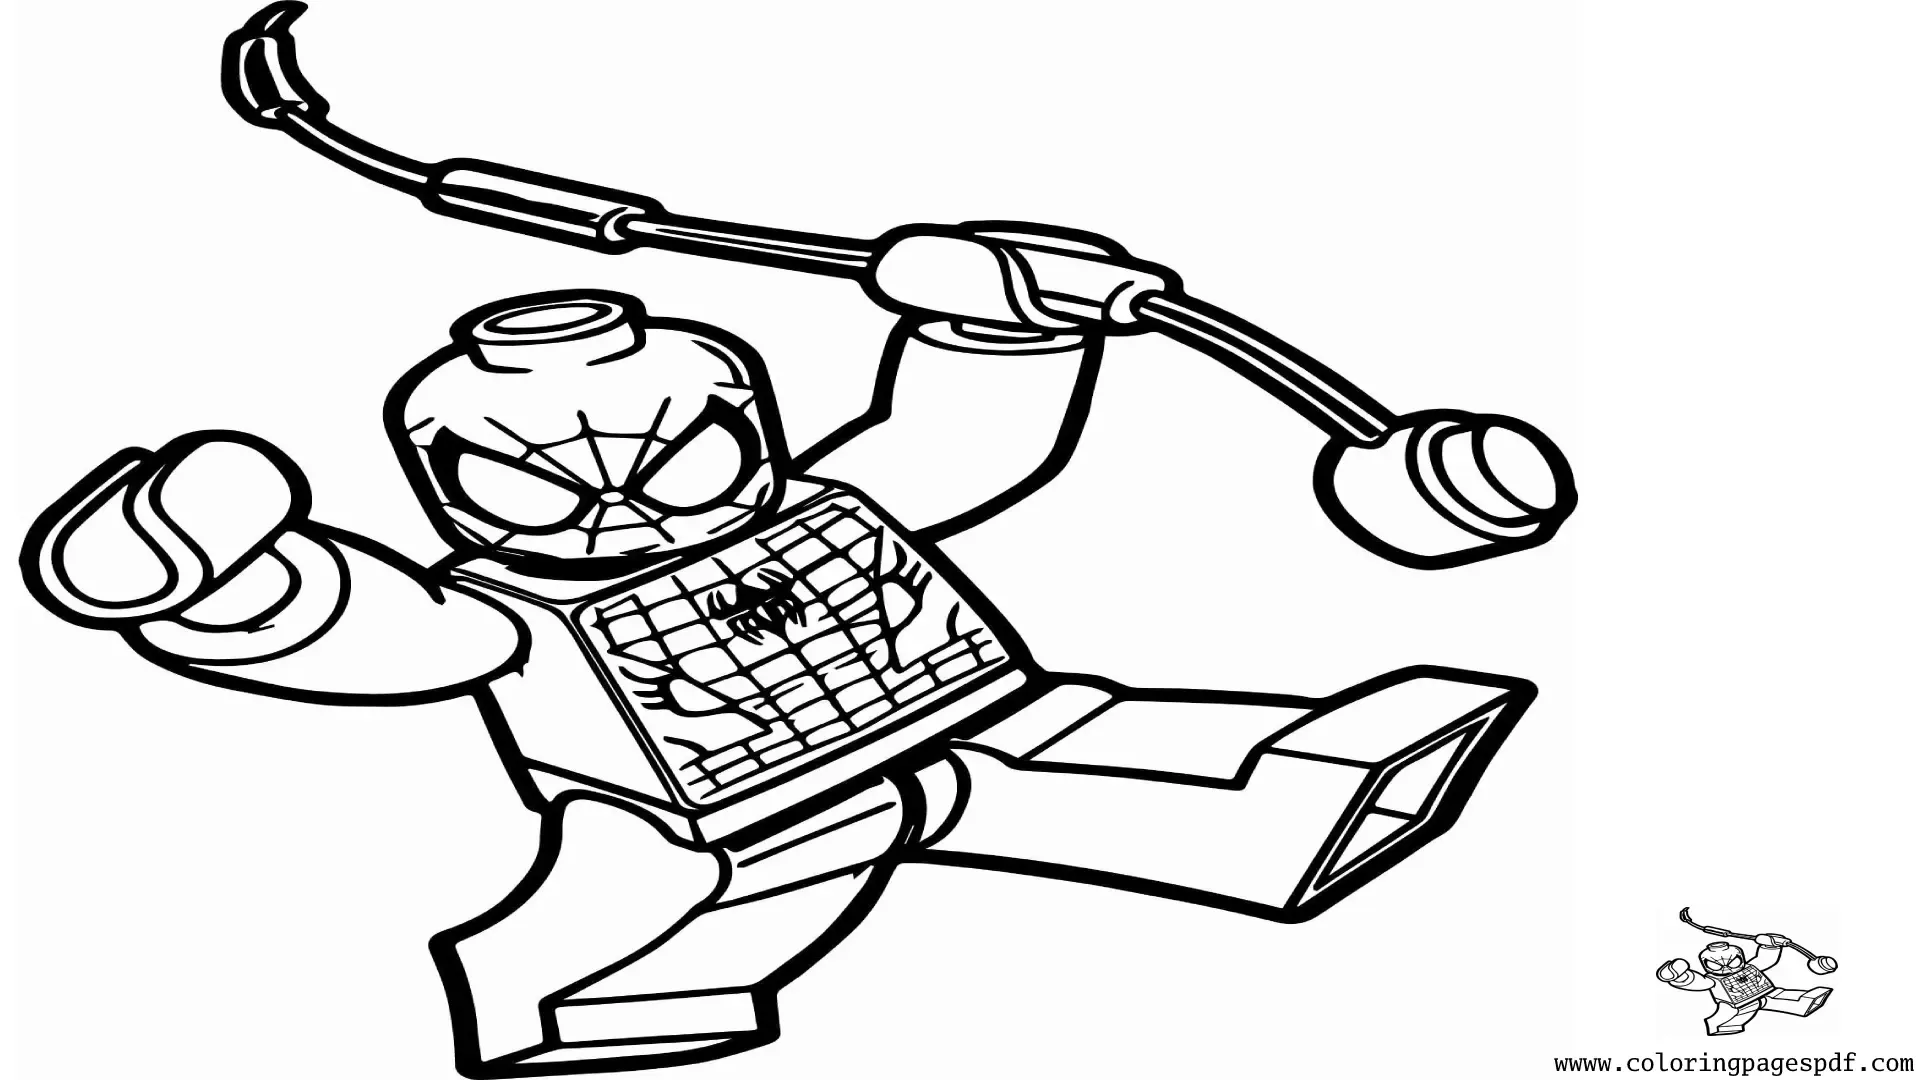 Coloring Page Of Lego Spiderman